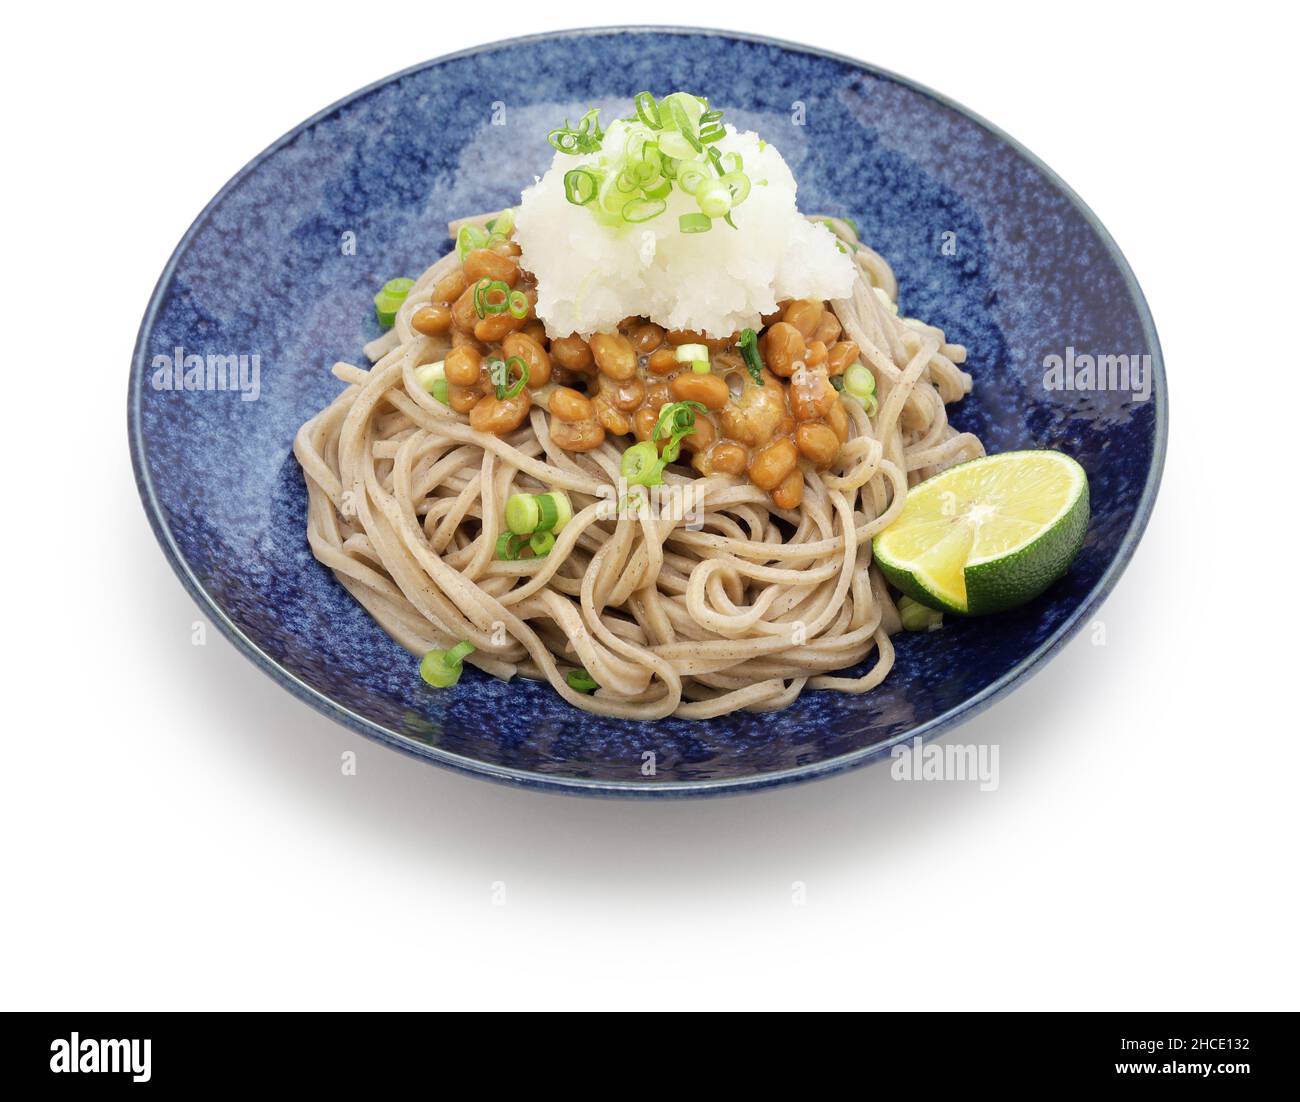 soba ( buckwheat noodles ) with natto (fermented soybeans) and grated daikon radish, Japanese food Stock Photo